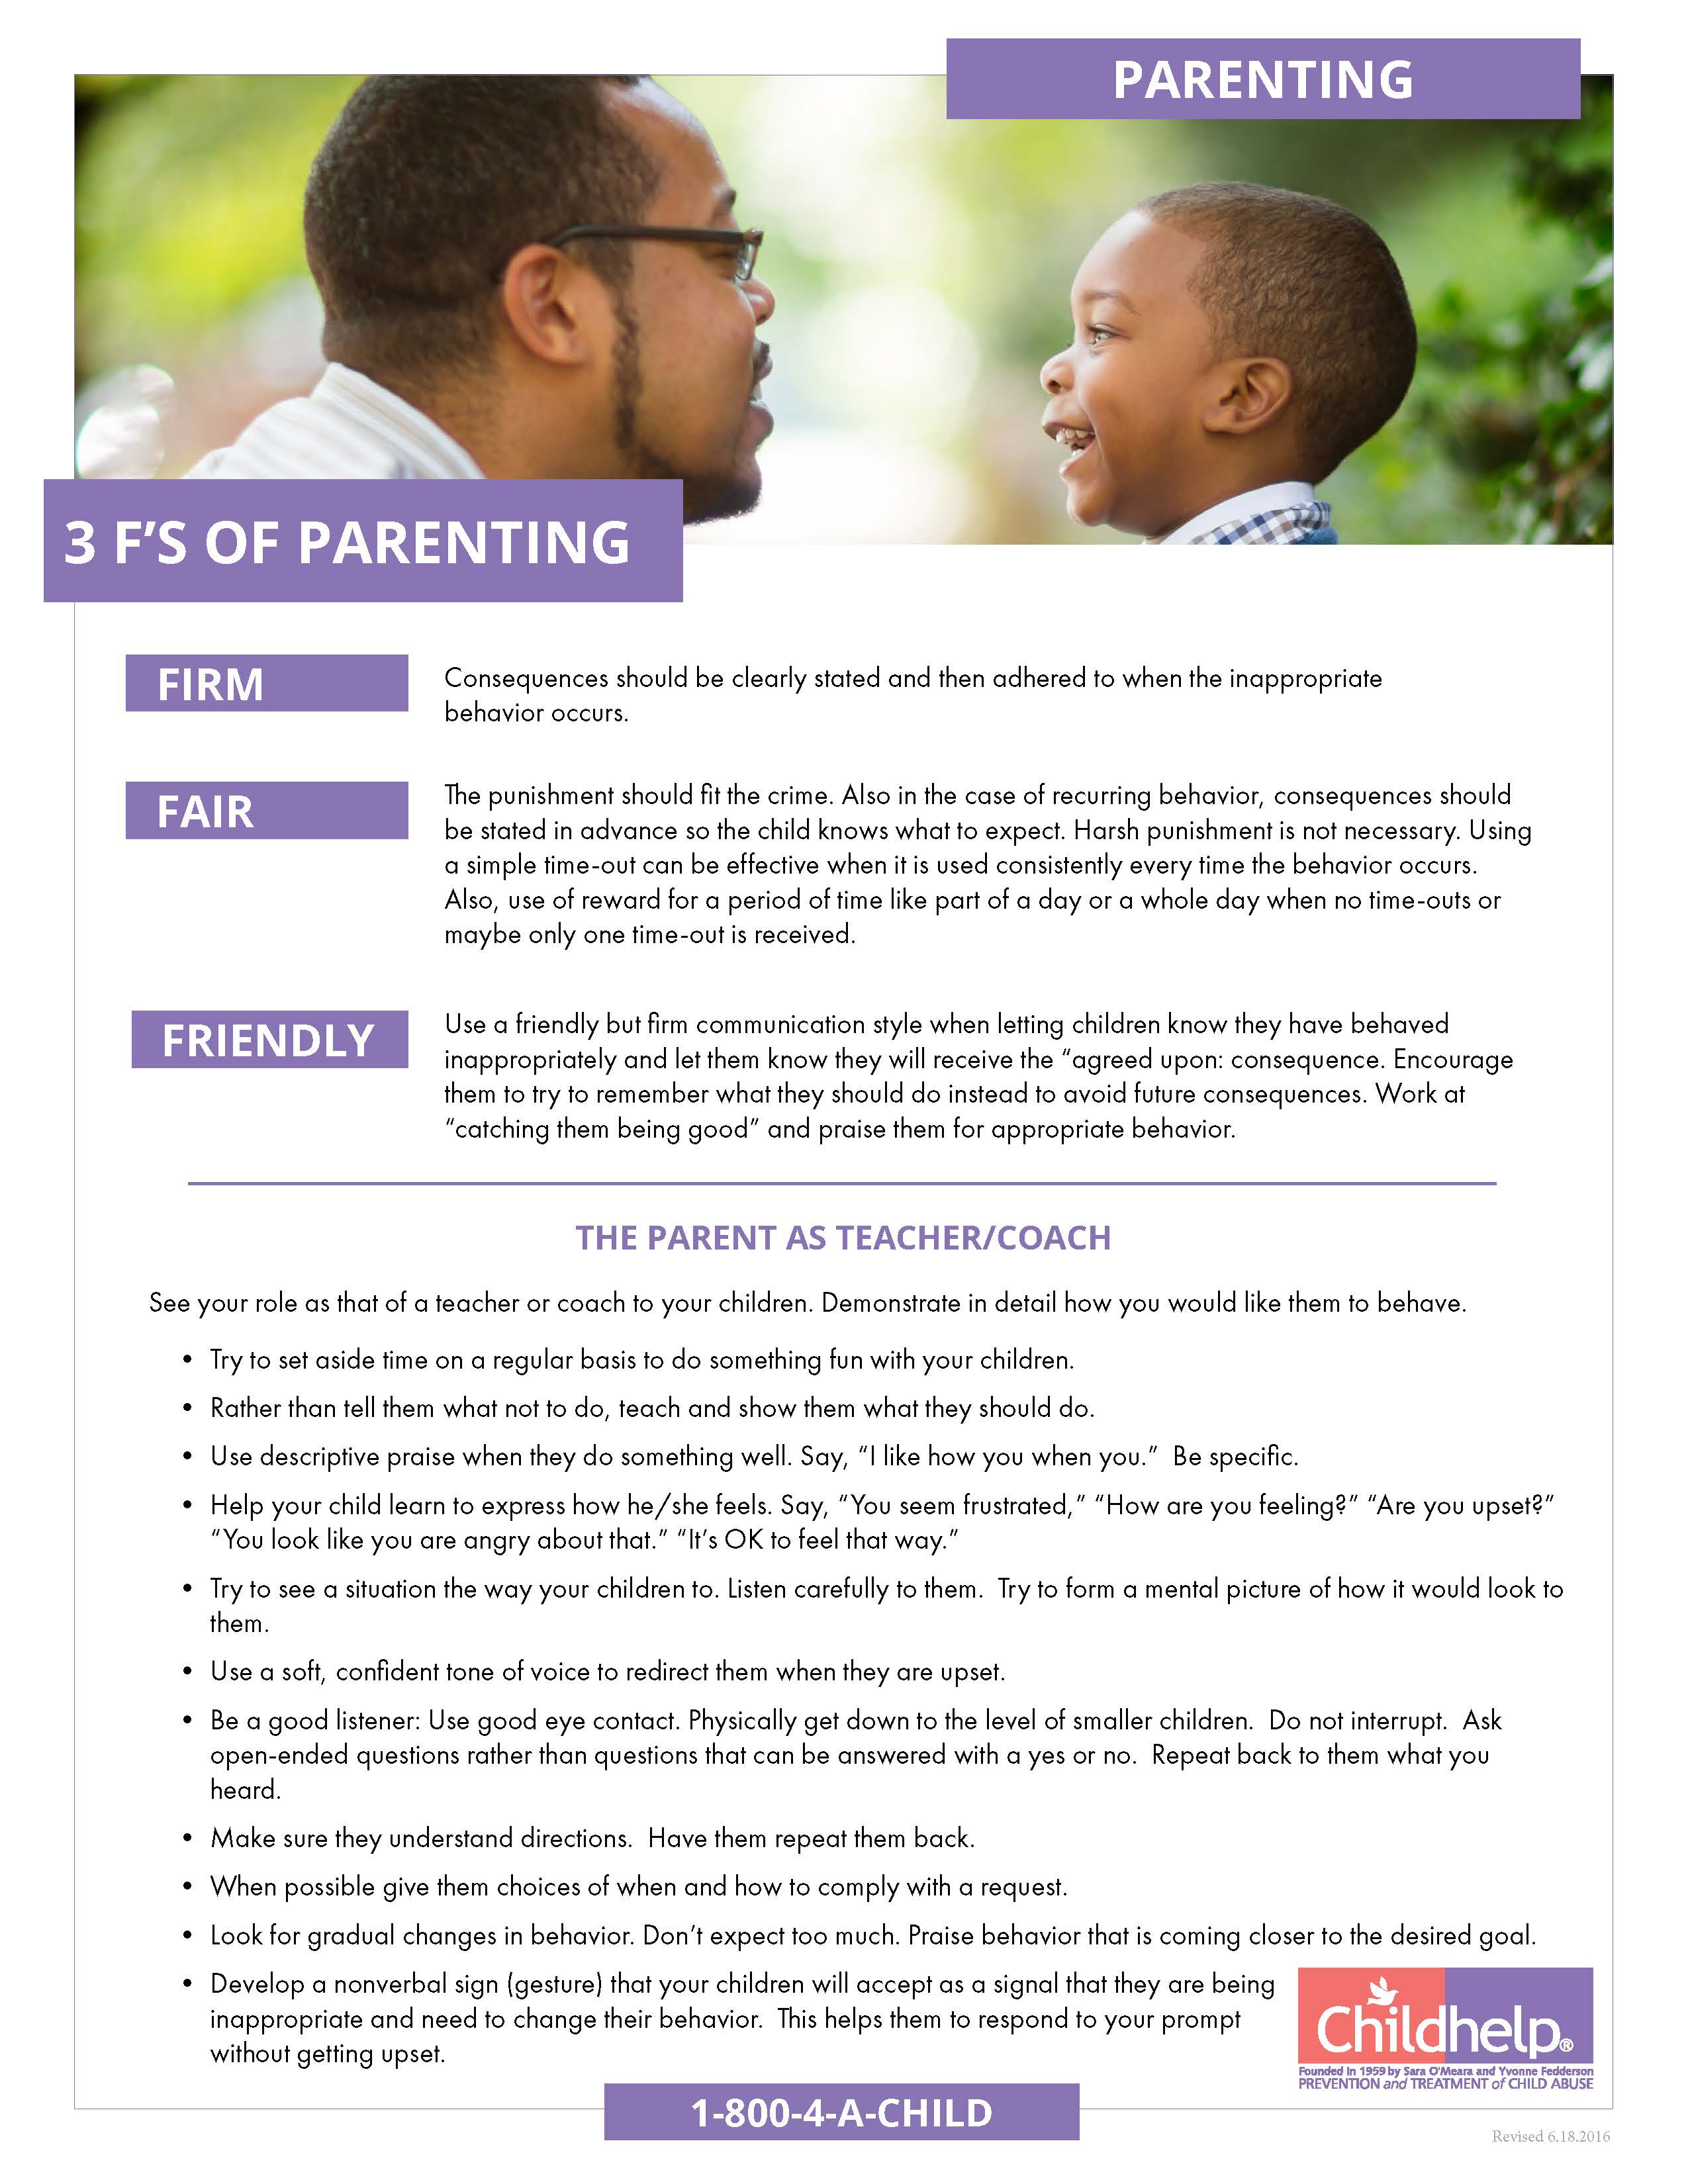 Parenting flyer. 3 F's of Parenting: Firm - Consequence should be clearly stated and then adhered to when the inappropriate behavior occurs. Fair. The punishment should fit the crime. Friendly. use a friendly but firm communication style when letting children know they have behaved inapprorpaitely and let them know they will receive the agreed upon consequence. Harsh punishment is not necessary. Friendly. Use a friendly but firm communication style when letting children know they have behaved inappropriatly and let them know they will receive the consequence. 